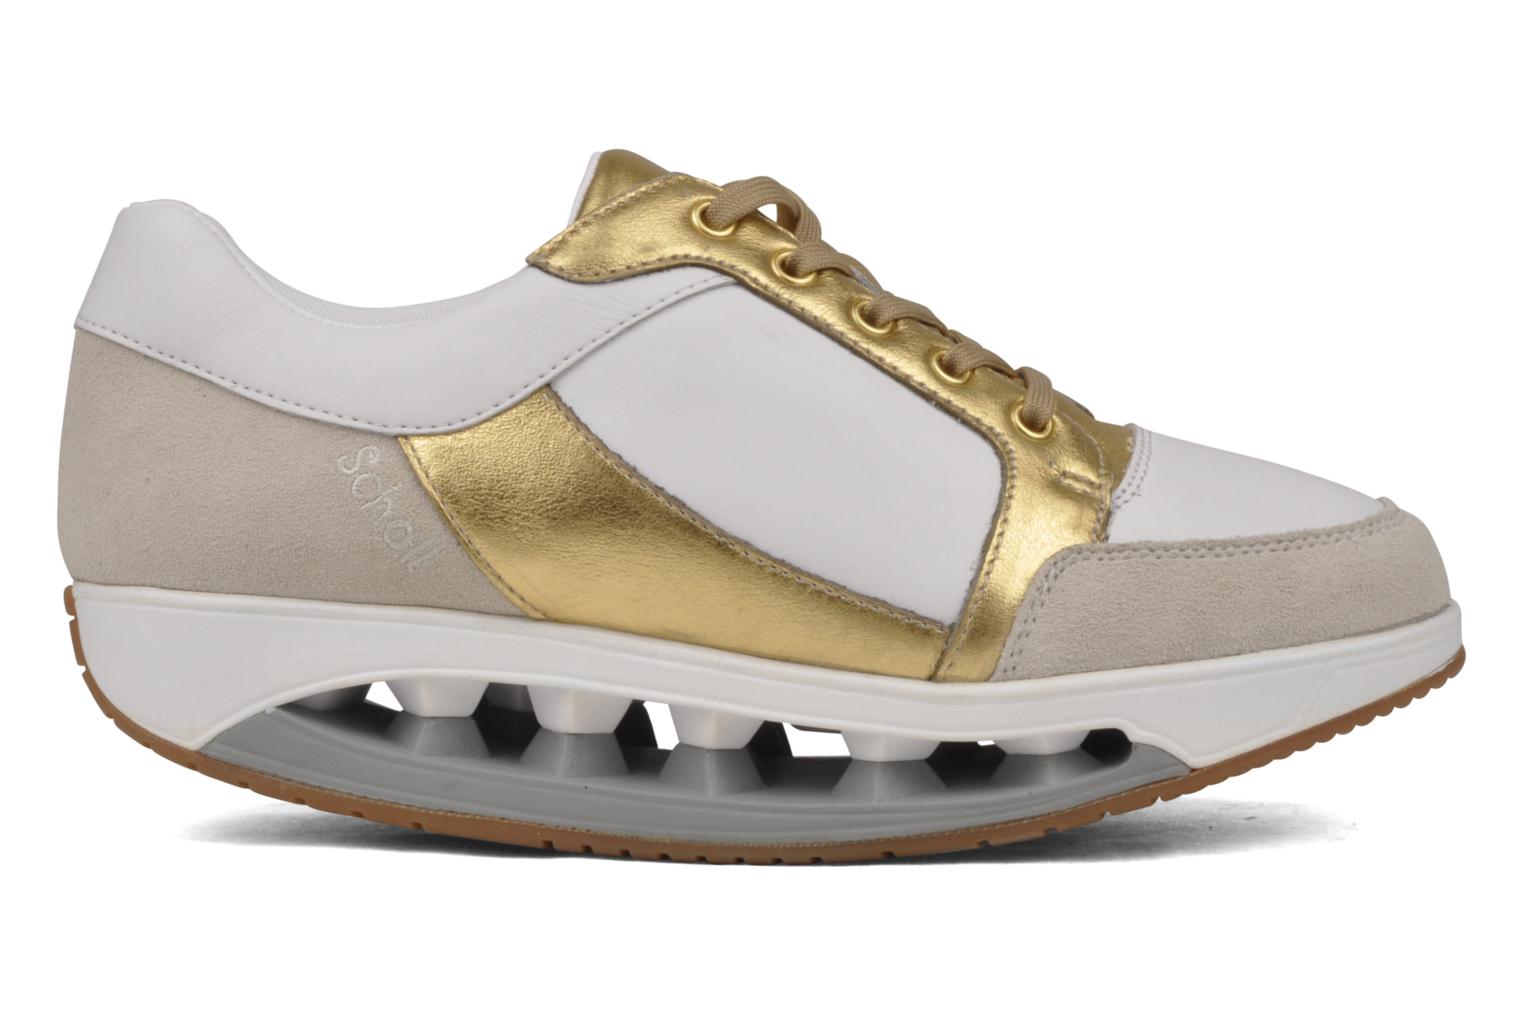 Scholl Starlit Basket Sport shoes in Bronze and Gold at Sarenza.co.uk ...